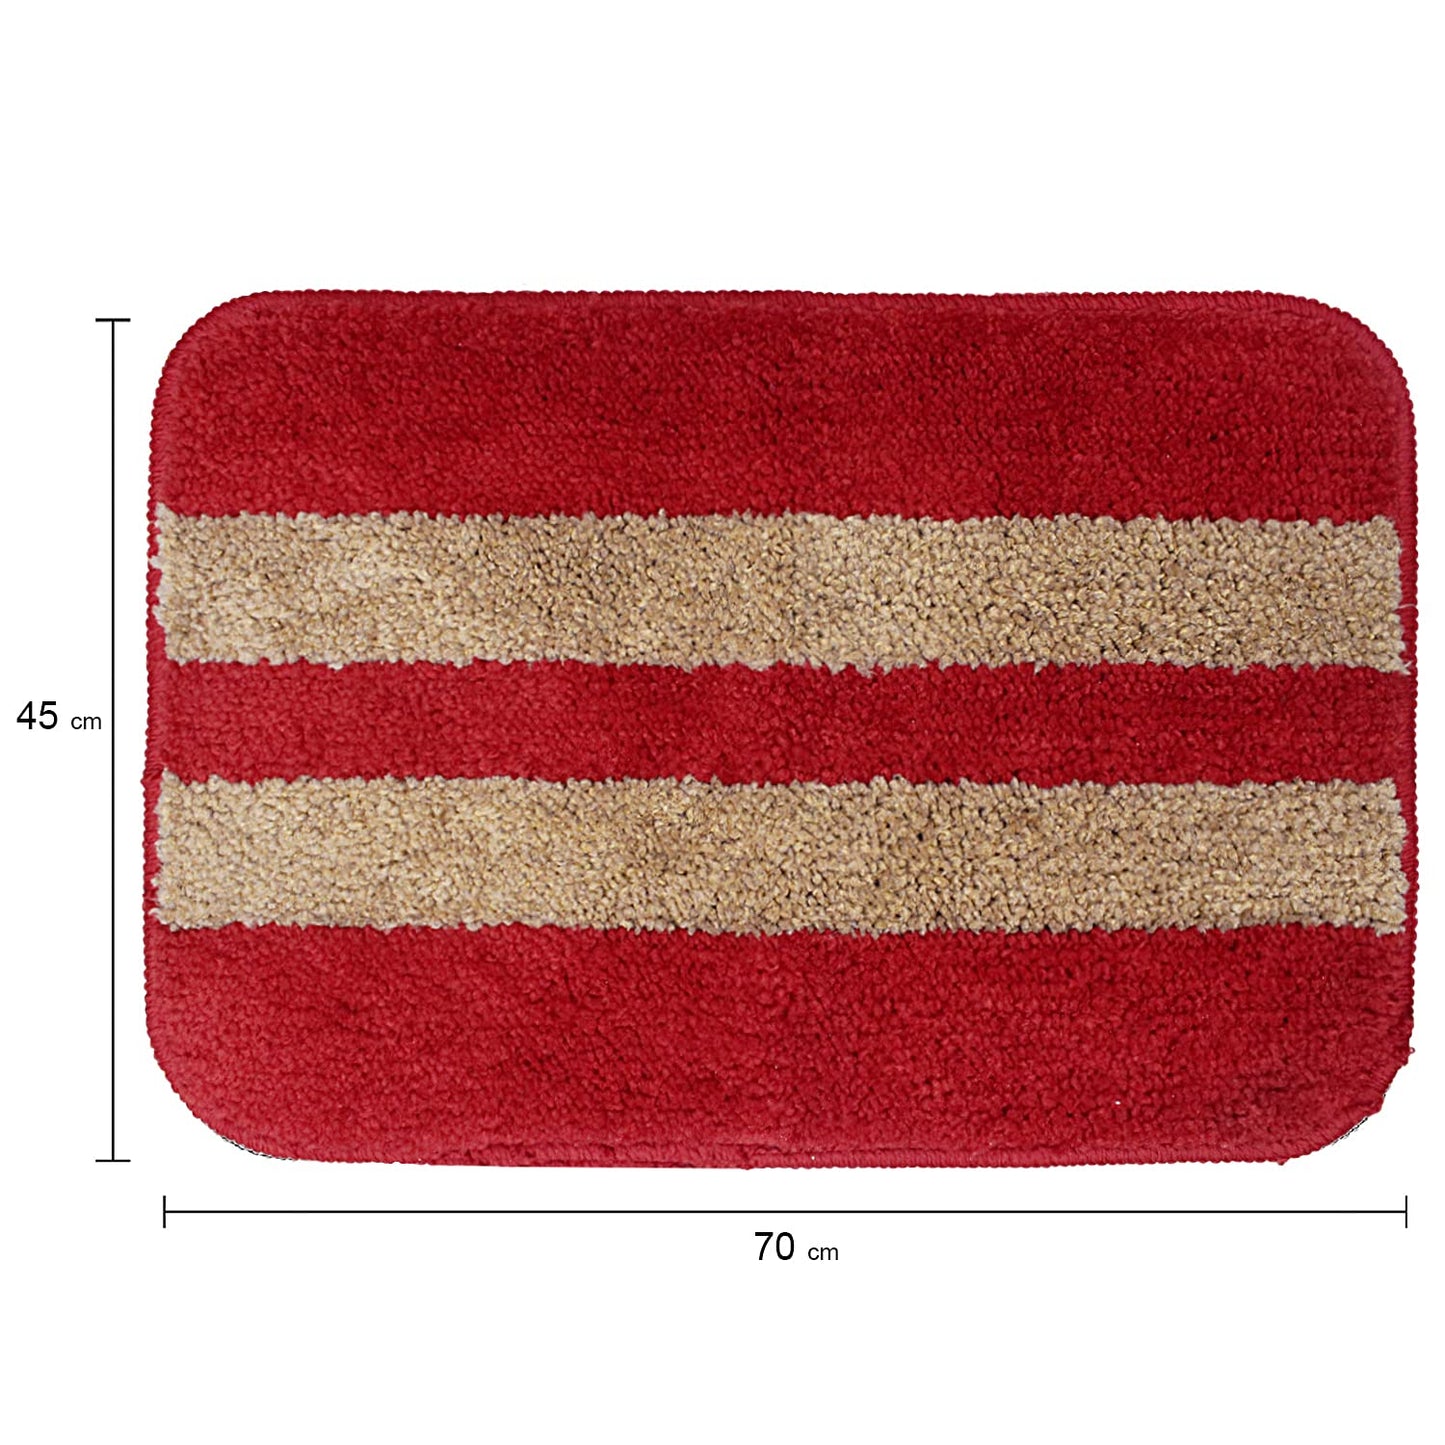 Kashyapa Rugs Collection - Affordable Red & Beige Colour Super Soft Microfiber Door Mat.